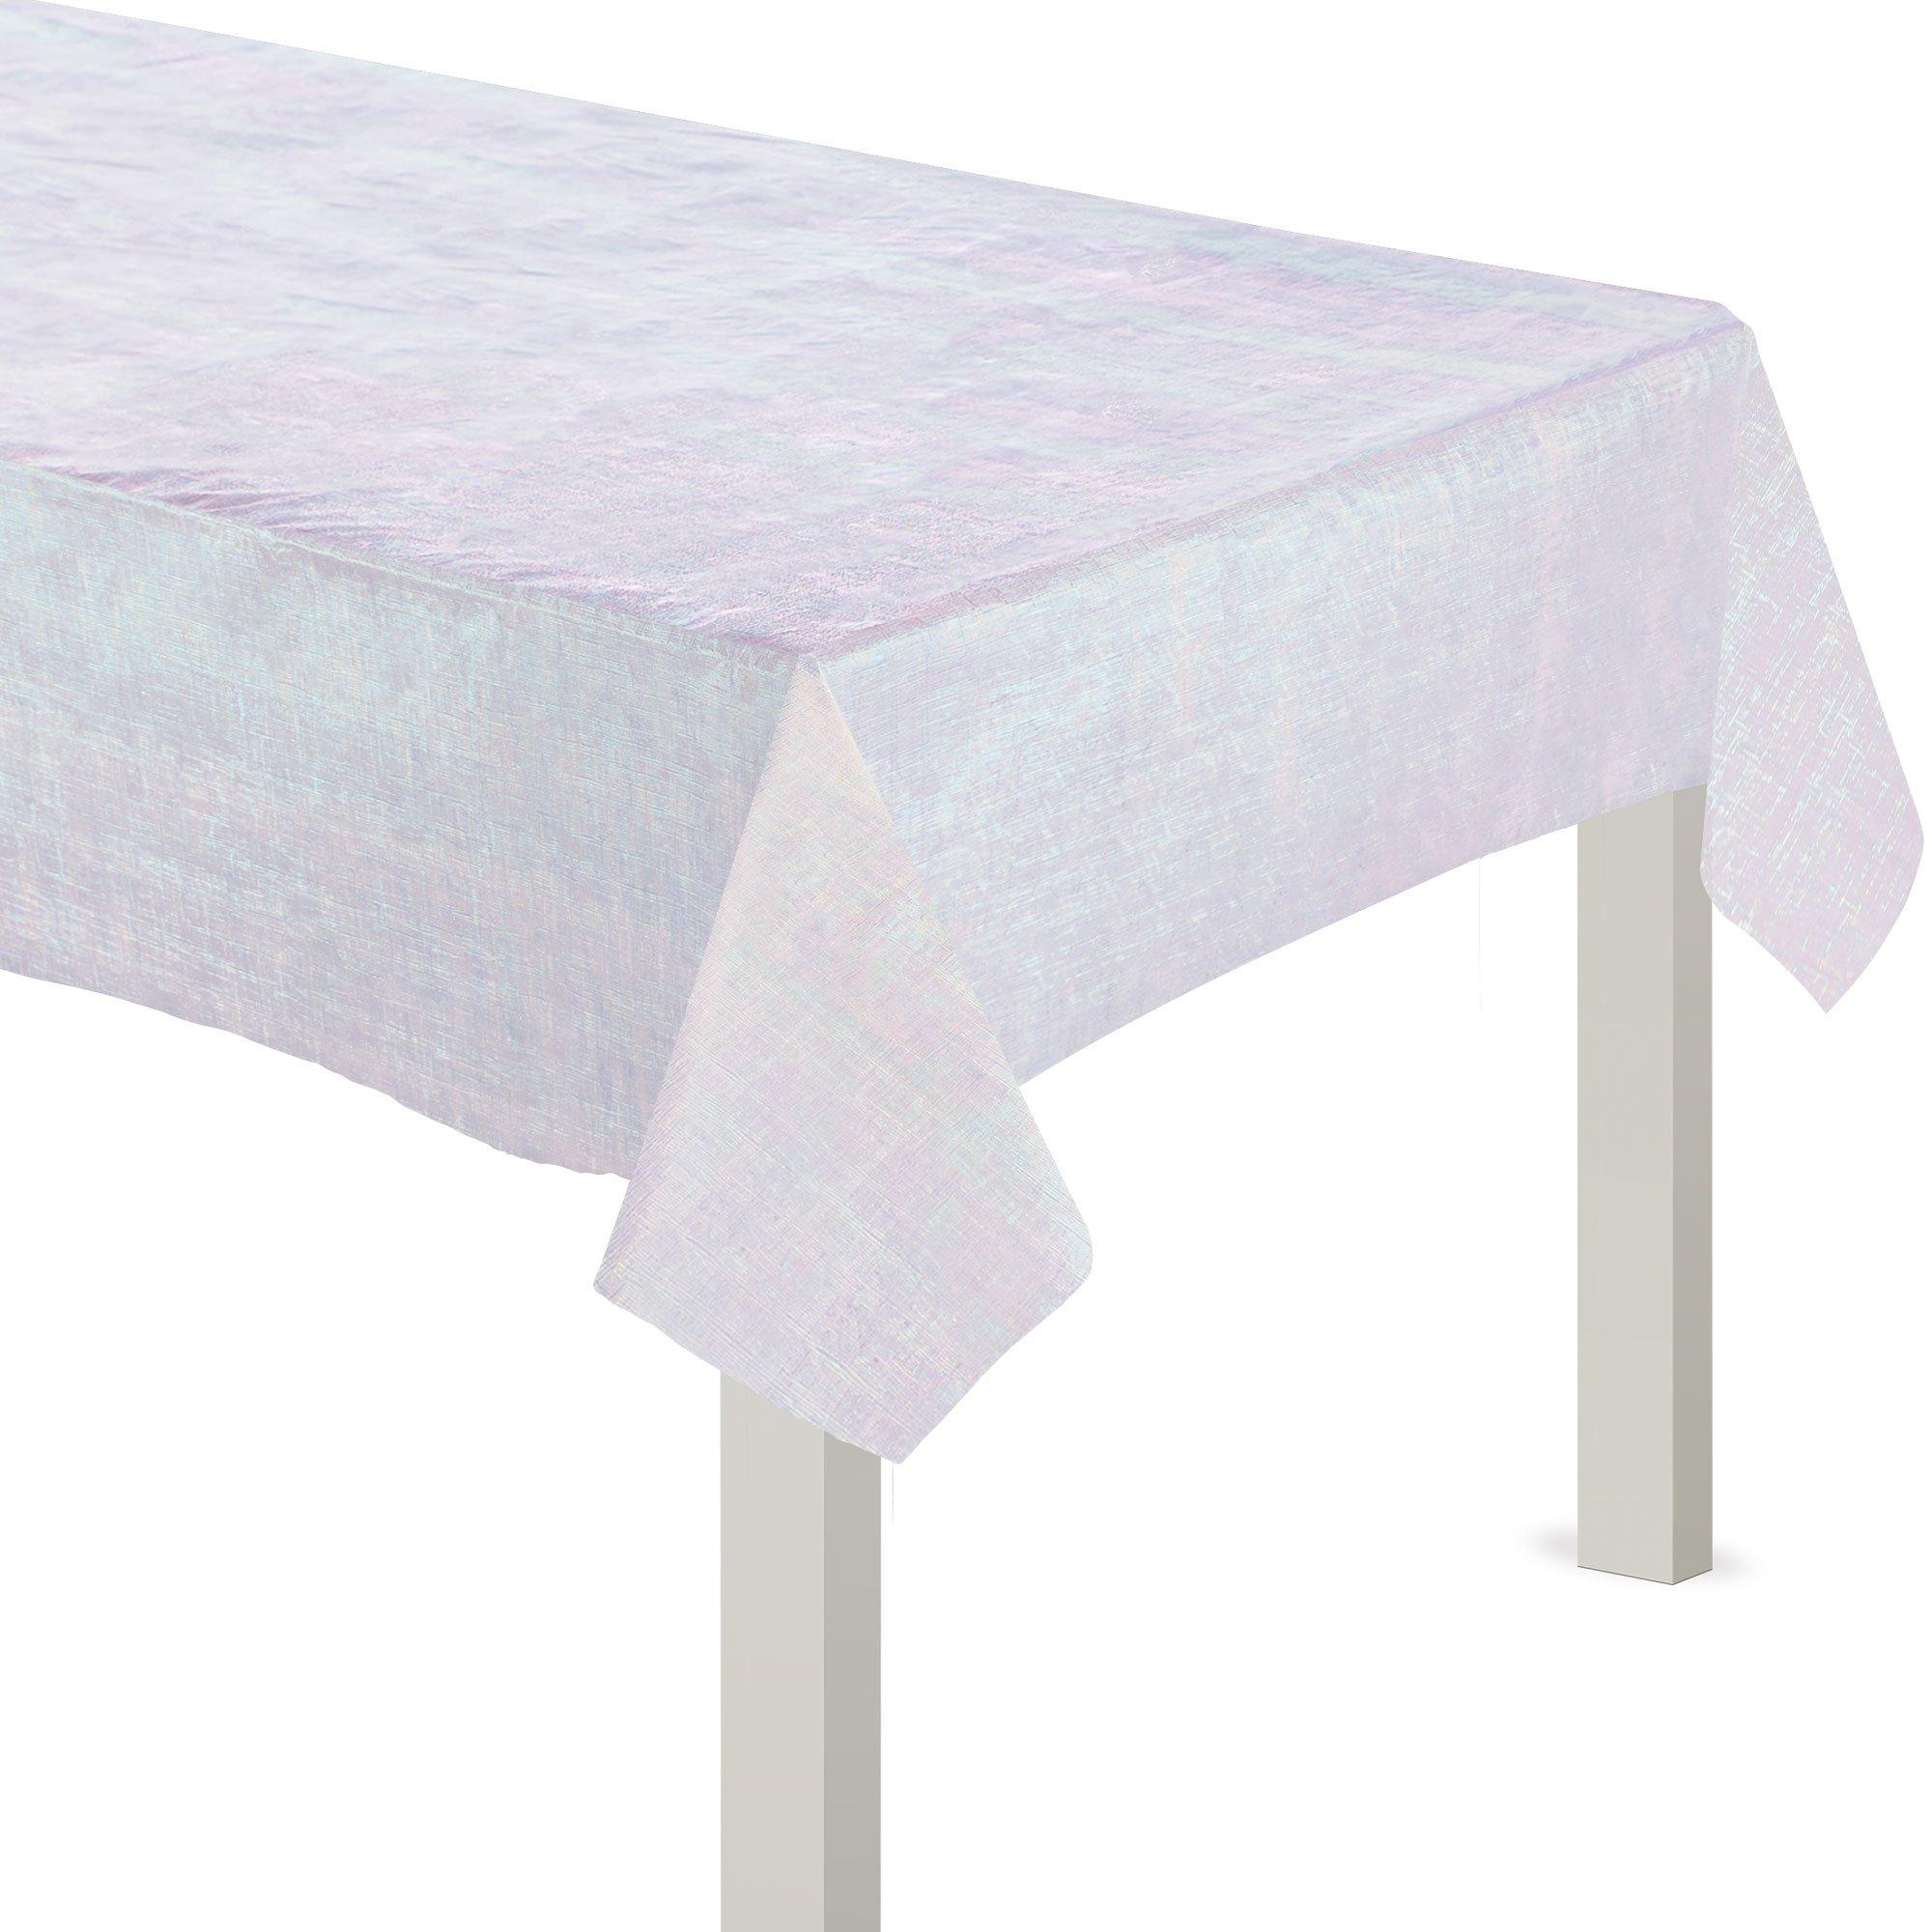 White Iridescent Paper & Plastic Table Cover, 54in x 102in - Size